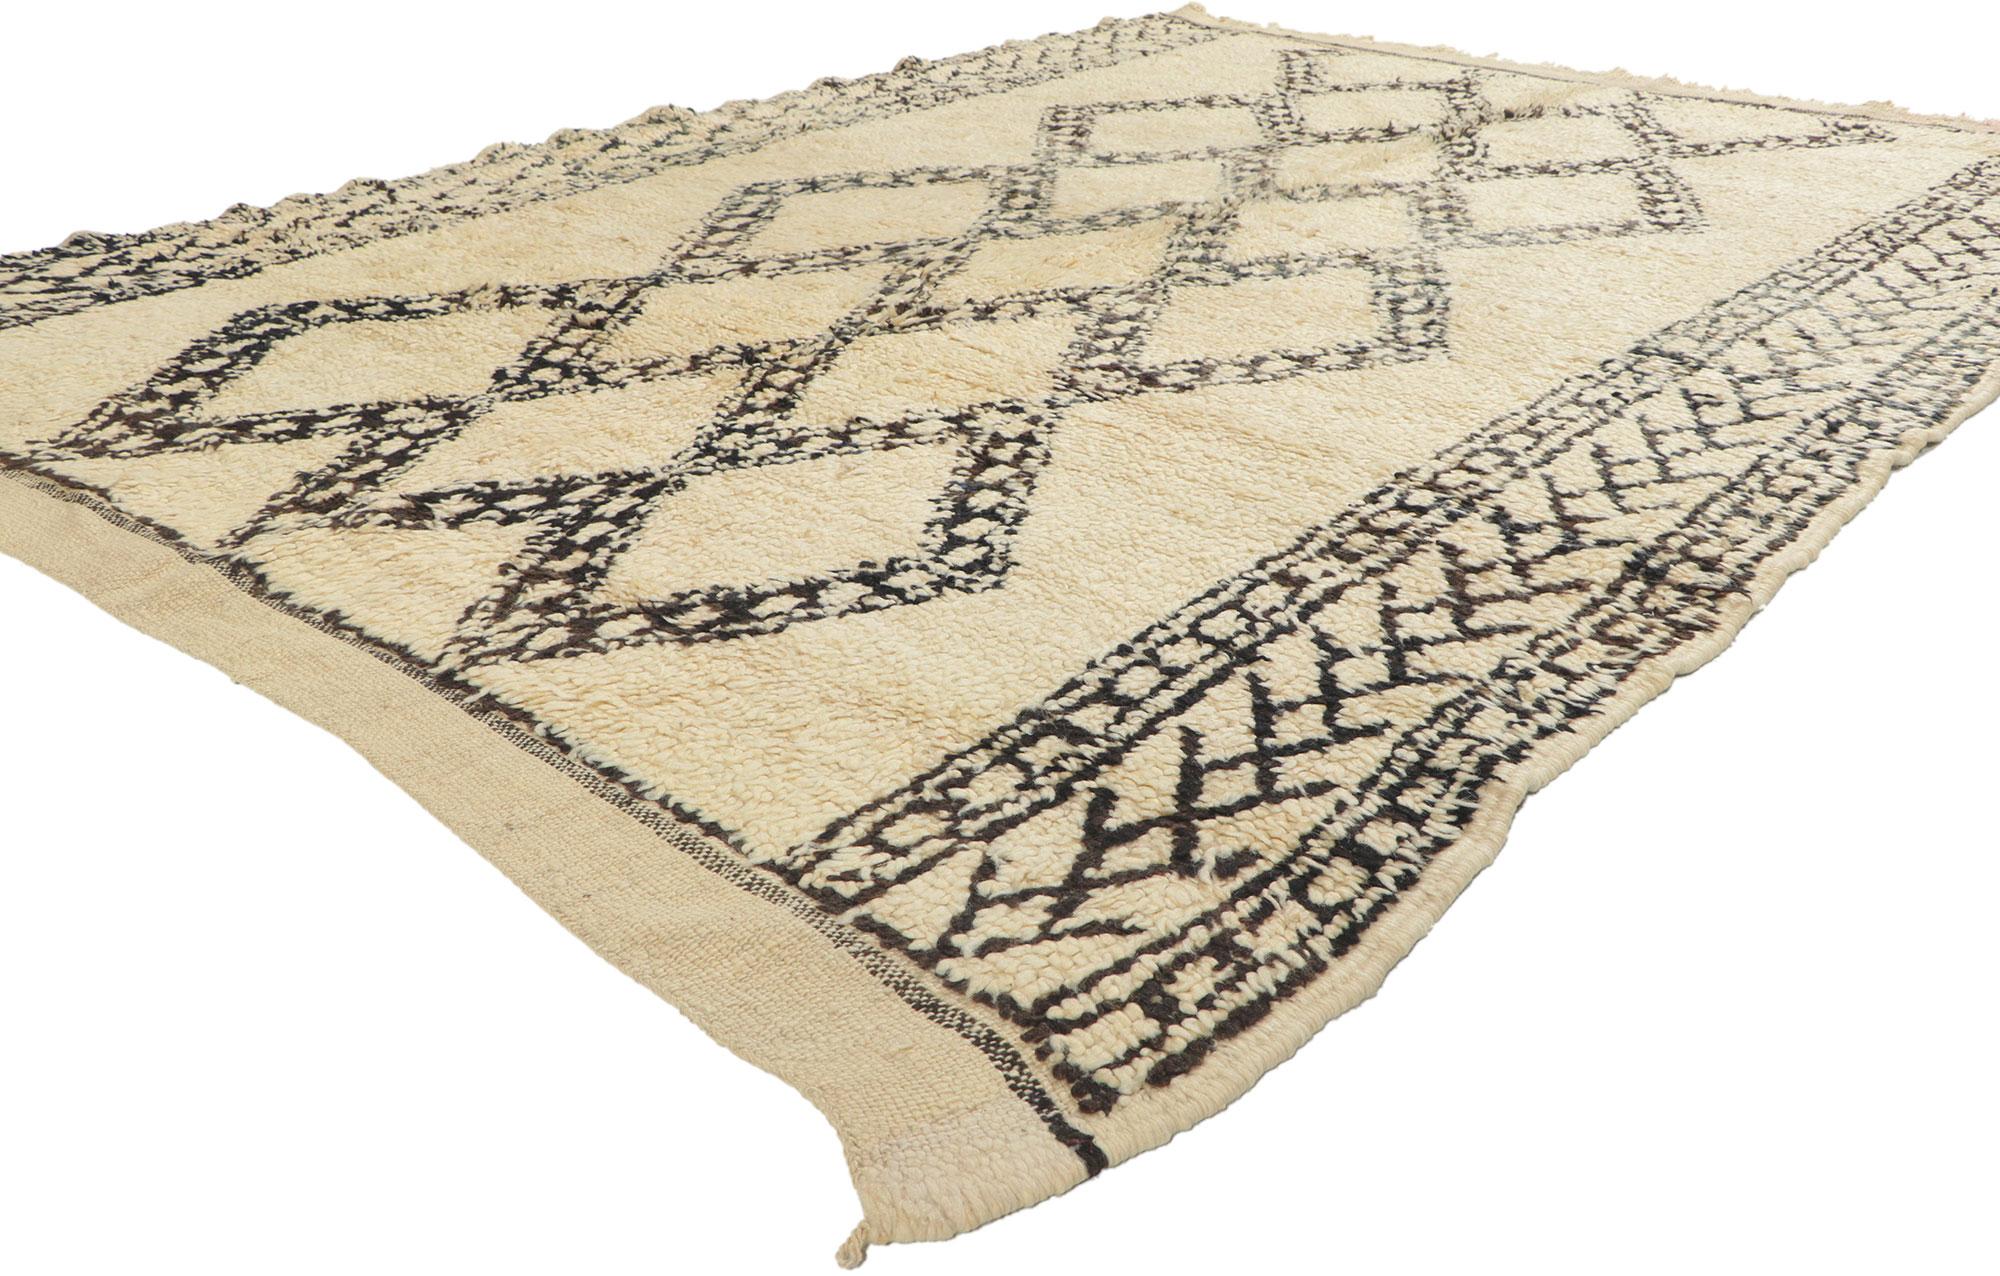 78396 Vintage Moroccan Beni Ourain rug, 05'11 x 08'00. With its simplicity, plush pile, incredible detail and texture, this hand knotted wool vintage Beni Ourain Moroccan rug is a captivating vision of woven beauty. The eye-catching diamond trellis